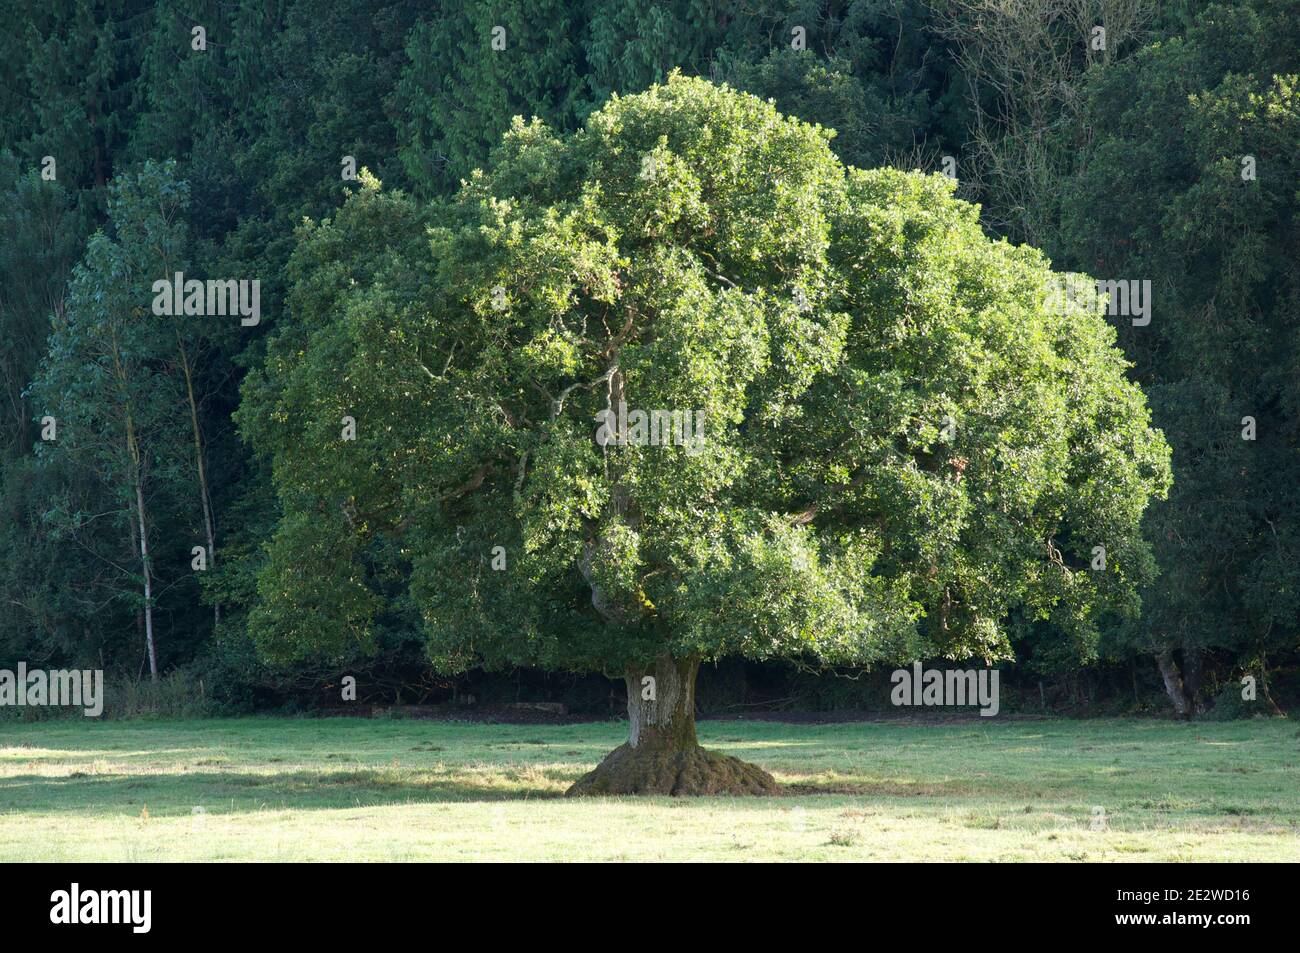 An English Oak (Quercus robur), the most common tree species in the UK, stands alone in a Summer meadow, with a lush growth of green foliage. Dorset. Stock Photo